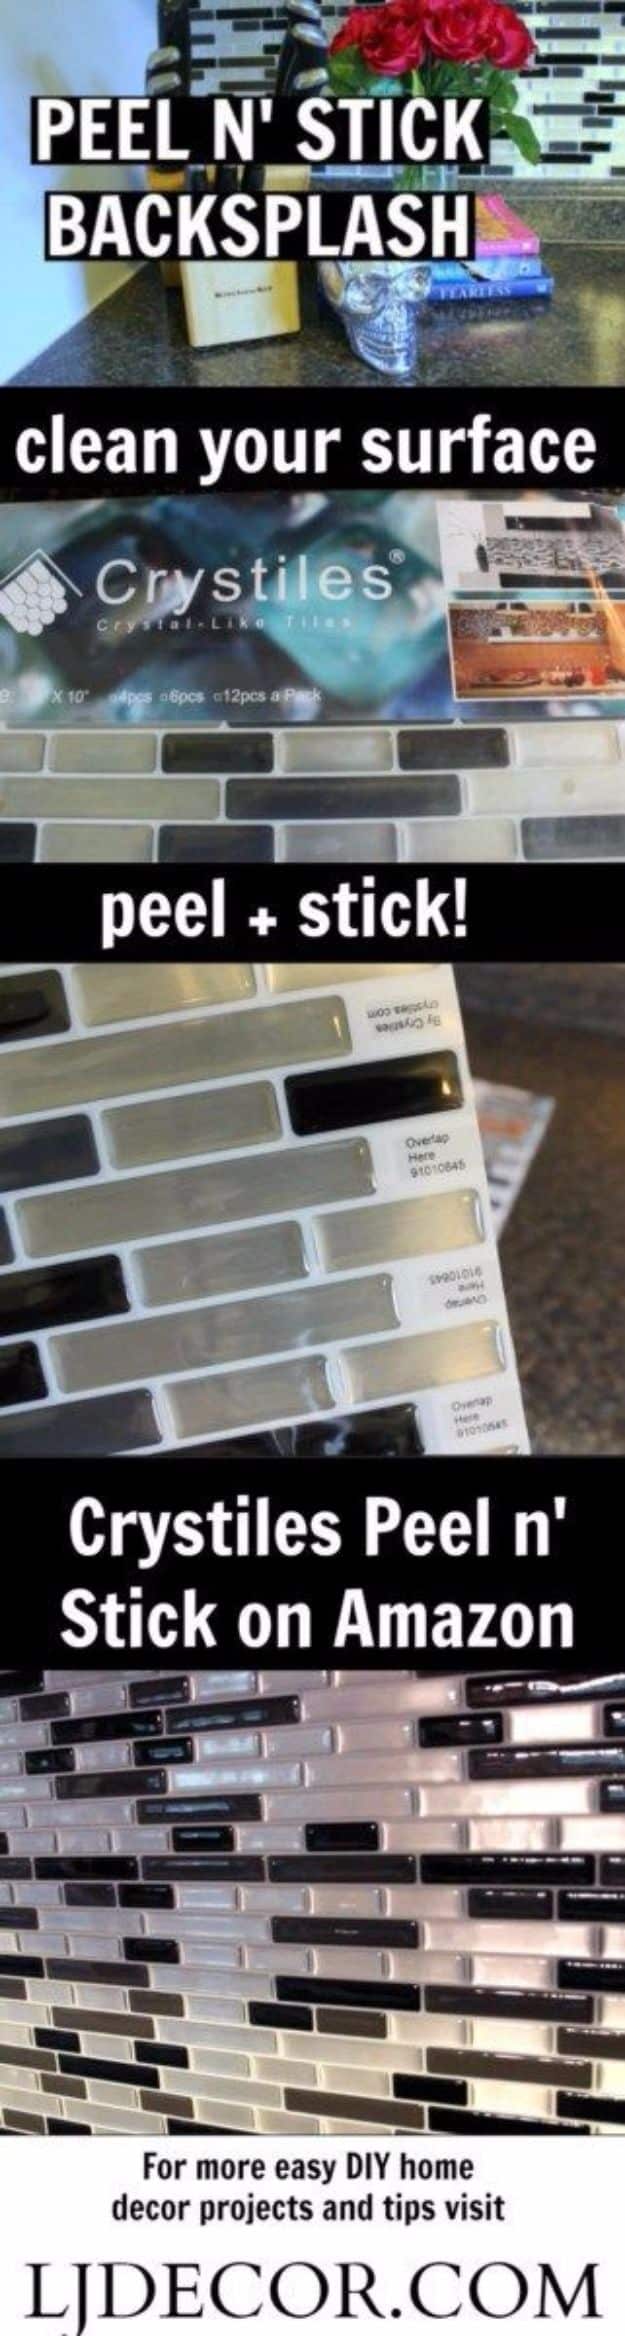 DIY Remodeling Hacks - DIY Peel N' Stick Backsplash Tiles - Quick and Easy Home Repair Tips and Tricks - Cool Hacks for DIY Home Improvement Ideas - Cheap Ways To Fix Bathroom, Bedroom, Kitchen, Outdoor, Living Room and Lighting - Creative Renovation on A Budget - DIY Projects and Crafts by DIY JOY #remodeling #homeimprovement #diy #hacks